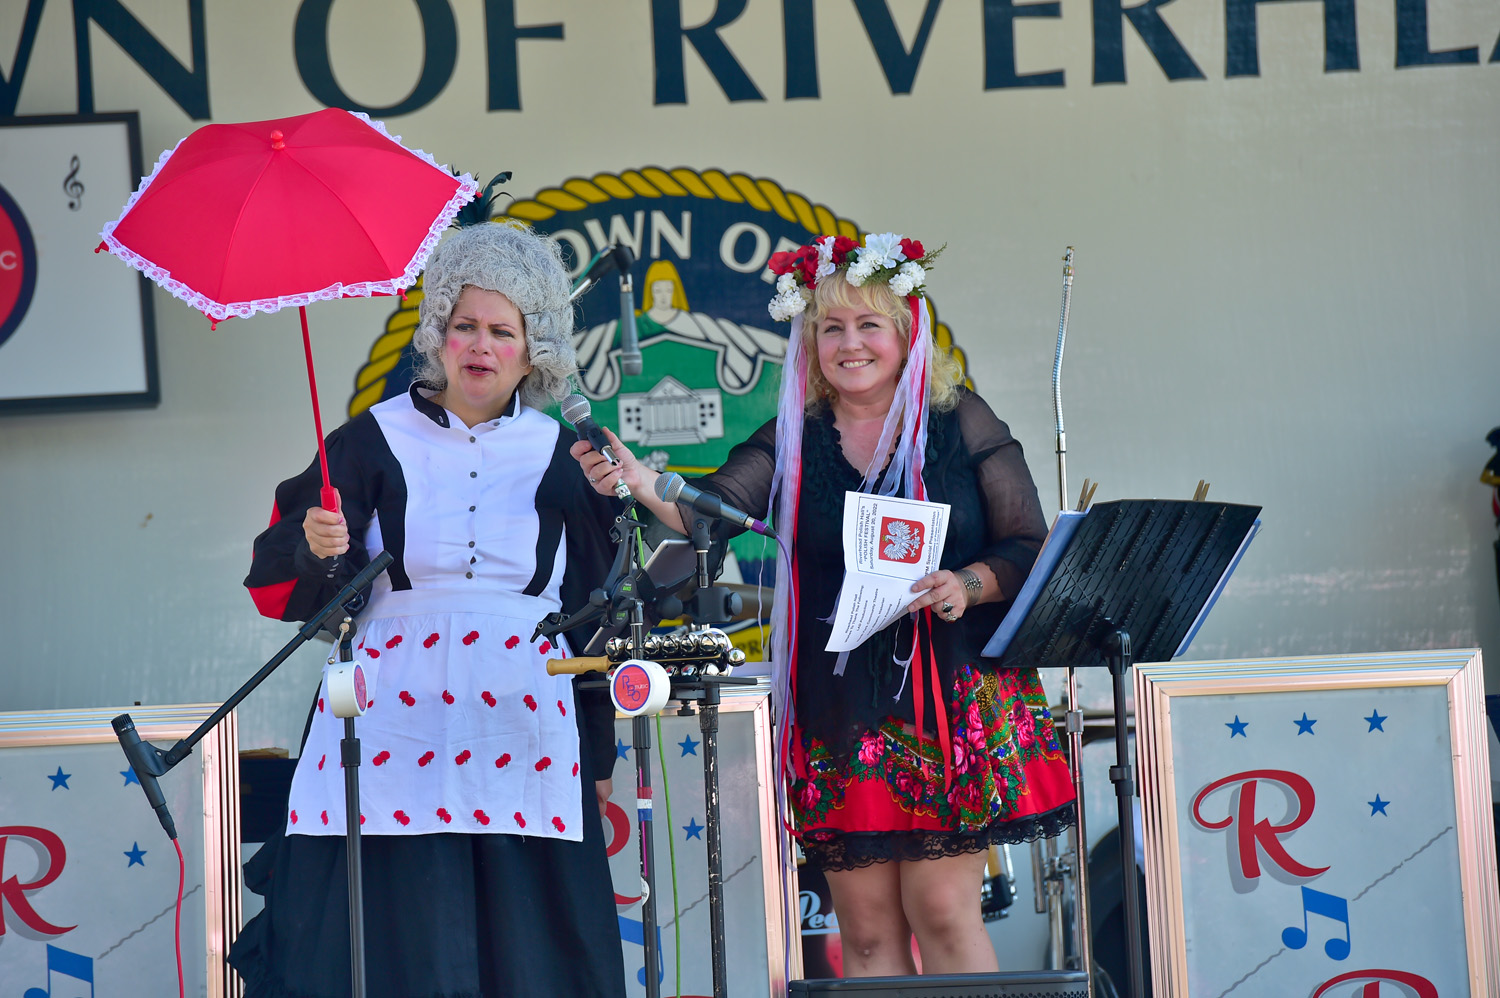 Polish Festival features food, music, historic characters and more at